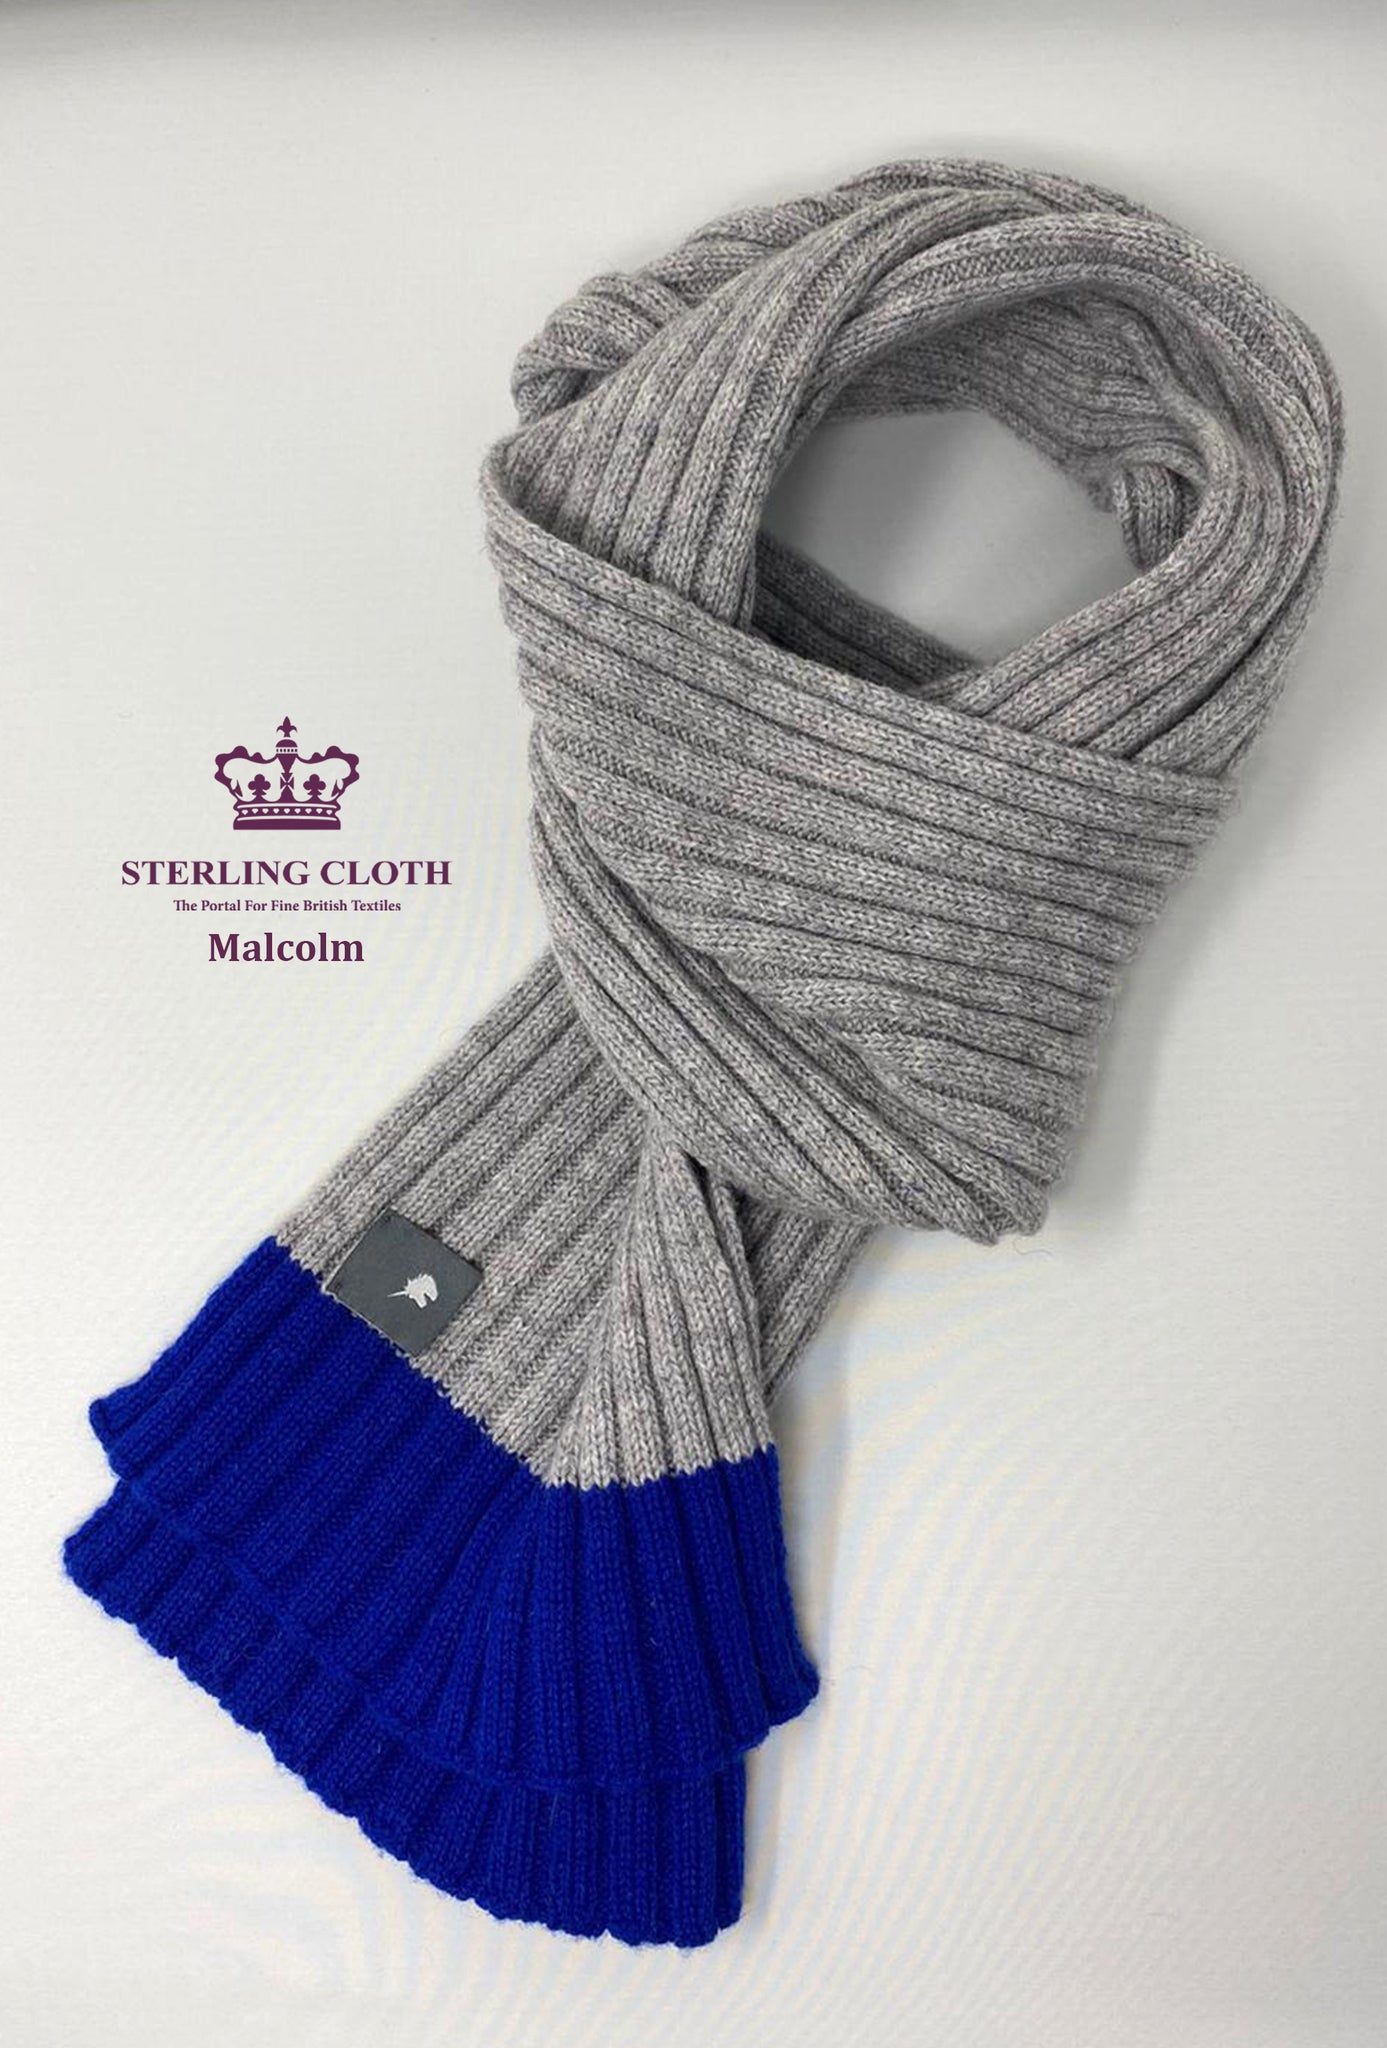 Malcolm - Pure Merino Wool, Rib Knitted Scarf, Made in Scotland, Light Grey with Blue Trim